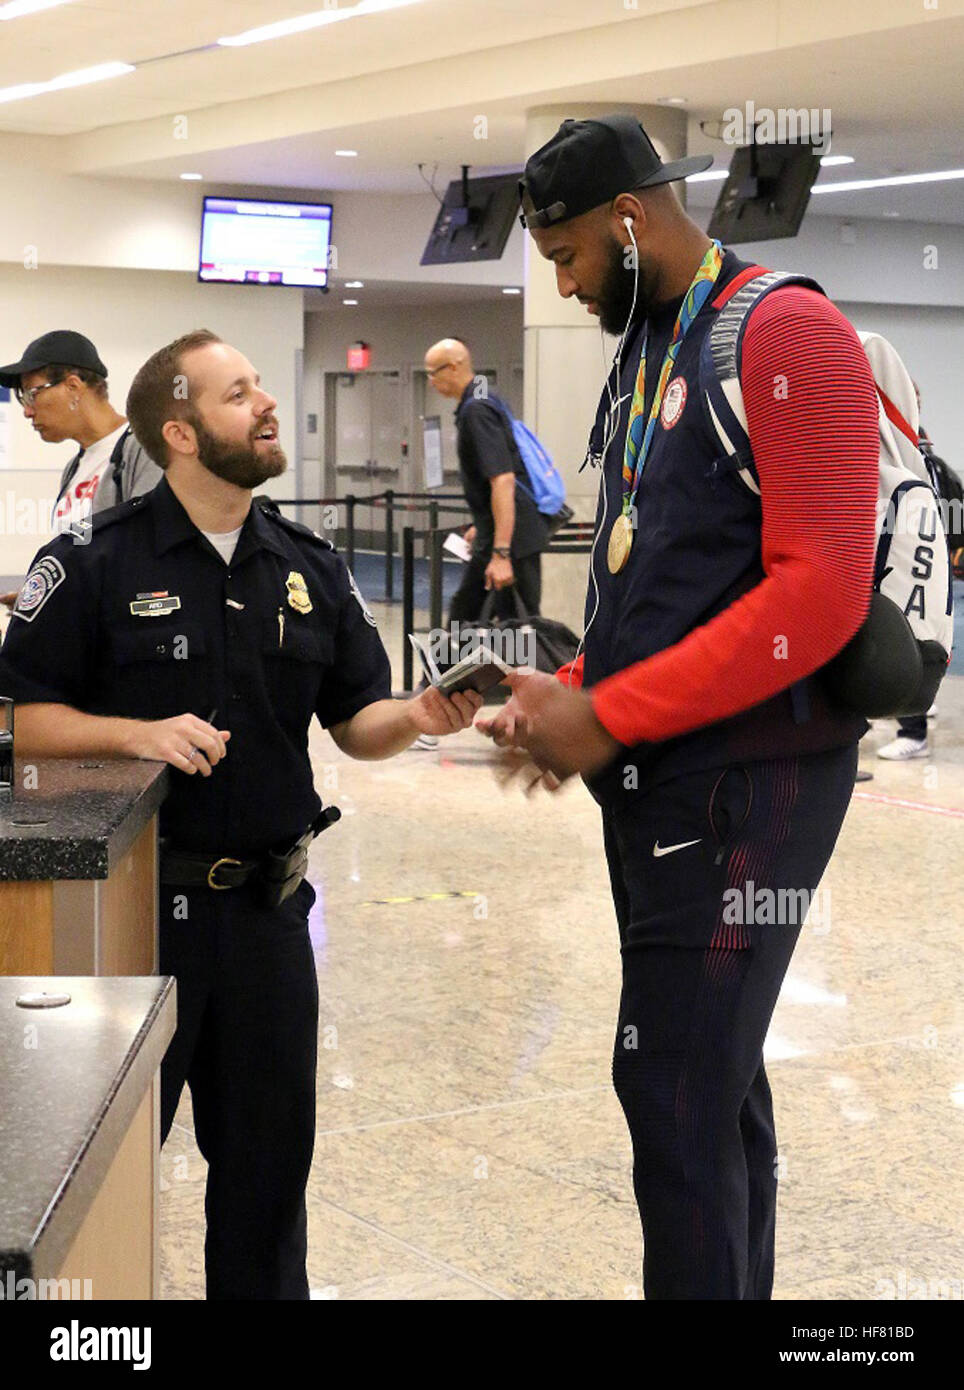 Olympic athletes, families and passengers were welcomed and cleared by U.S. Customs and Border Protection officers at Hartsfield Jackson Atlanta International Airport. DeMarcus Cousins, center for the U.S. Olympic Men’s basketball team processes back into the United States from the Olympic games in Rio. Stock Photo